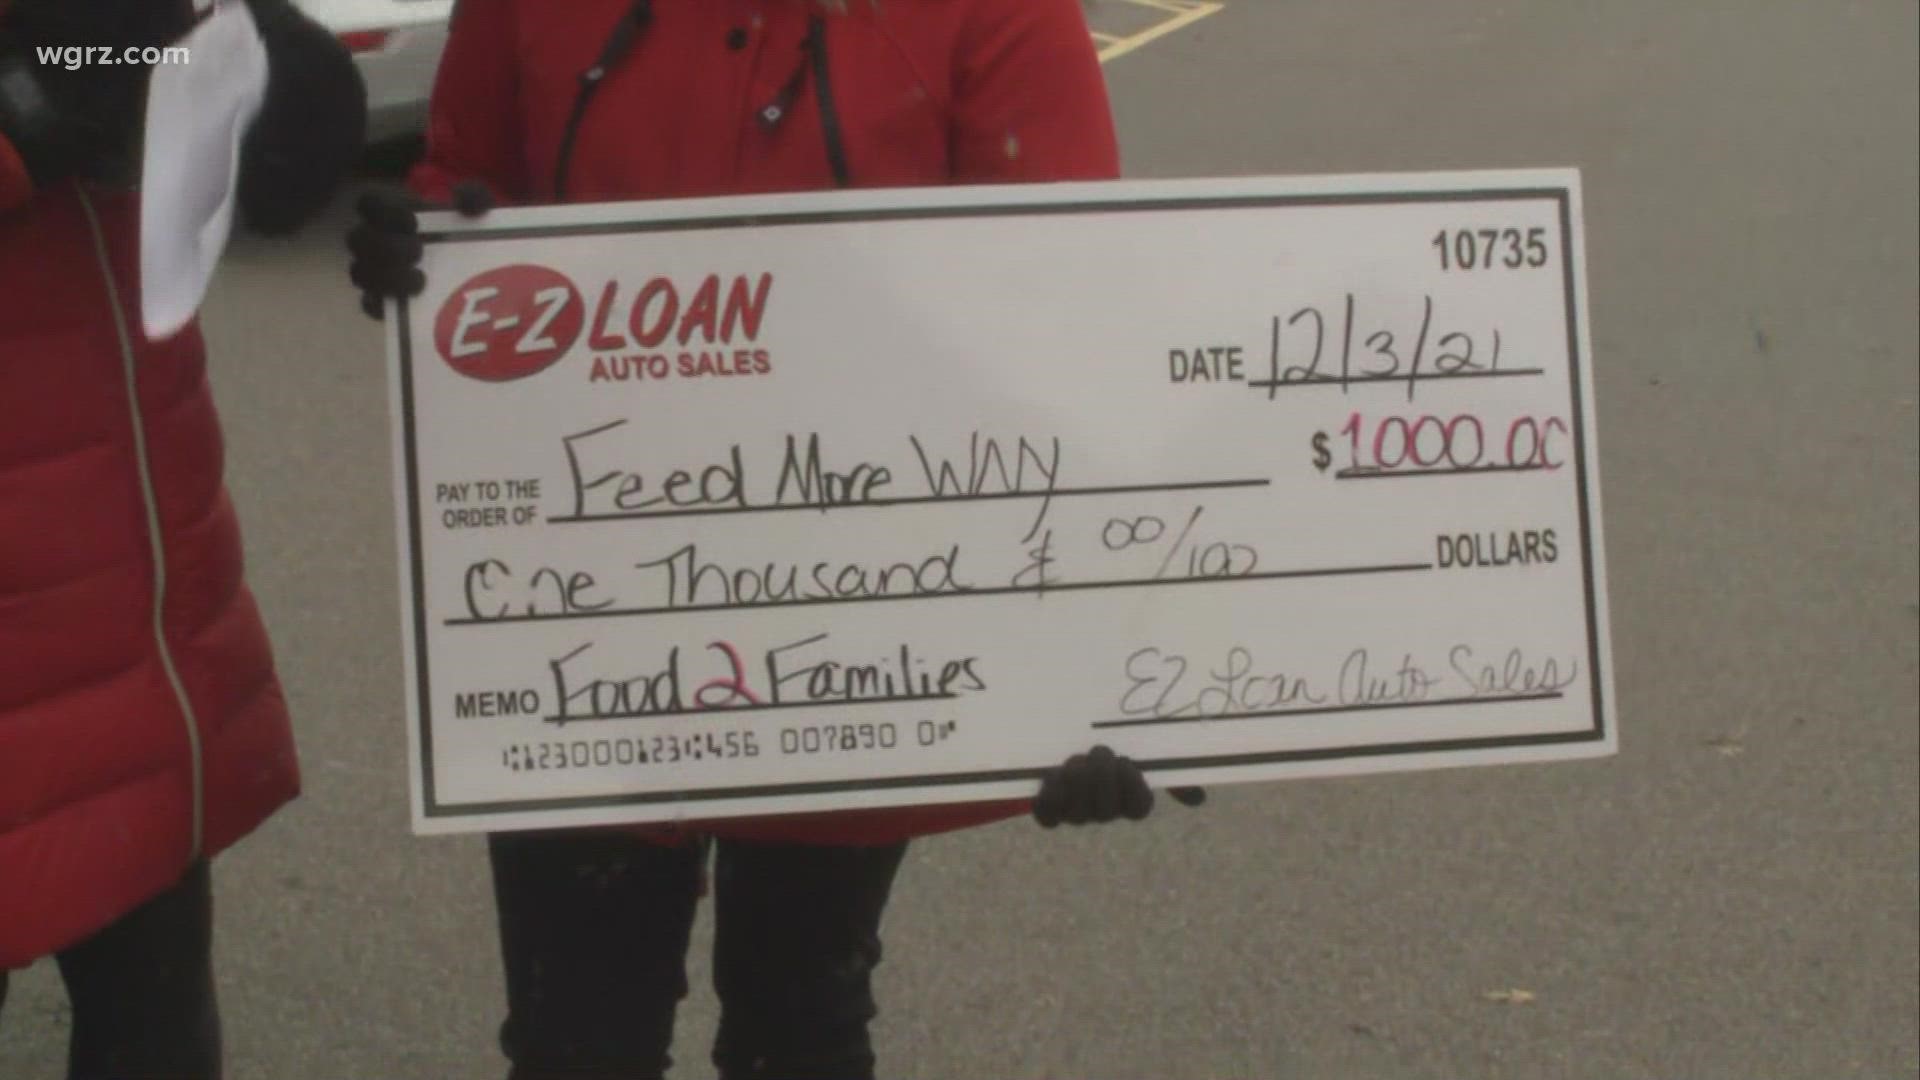 EZ Loan donated a $1000 dollars from employees and EZ loan will match it for a total of $2000.00 donations